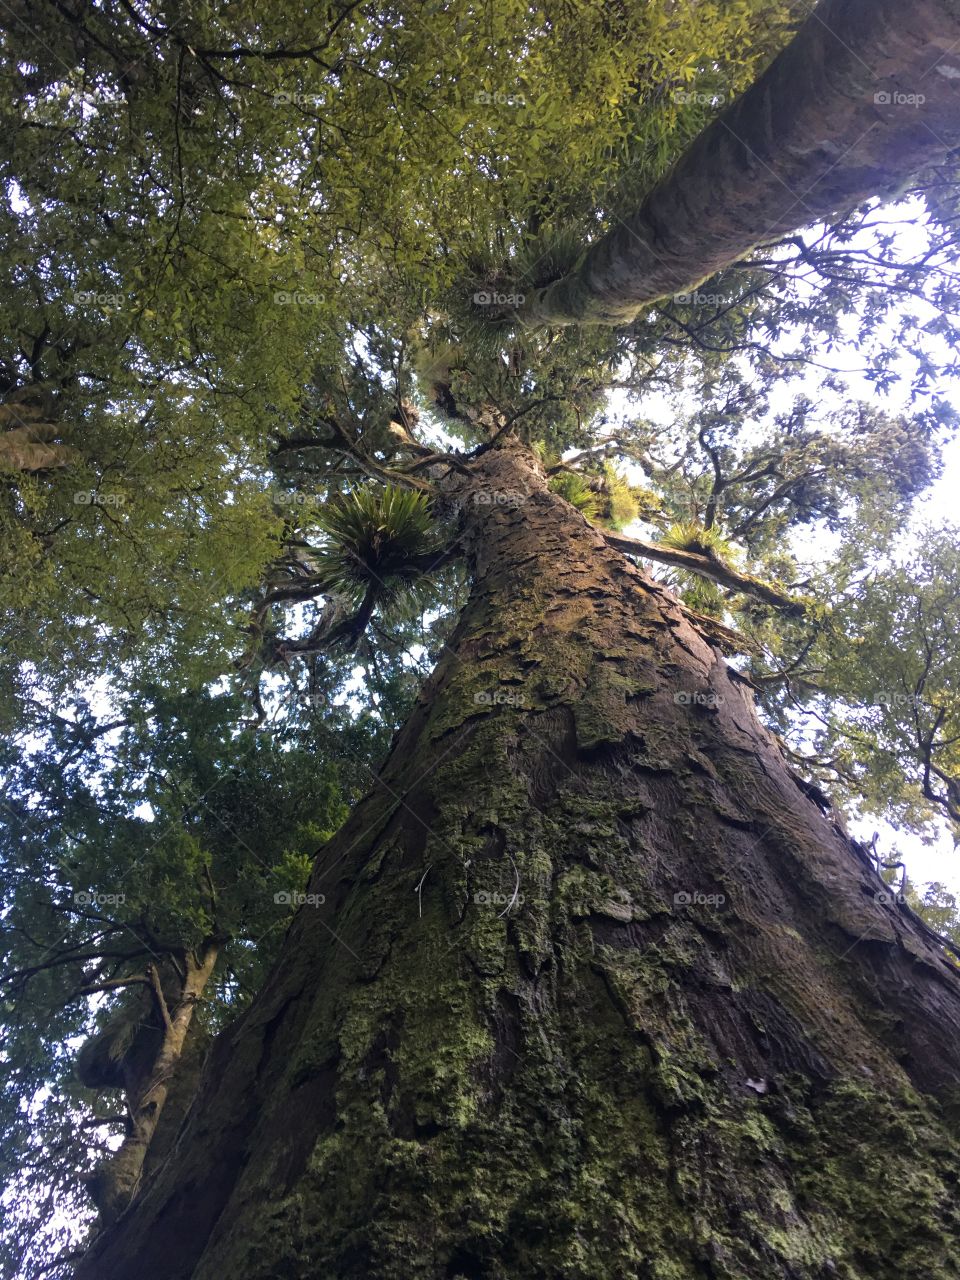 The giant Rata tree holds many secrets of the forest